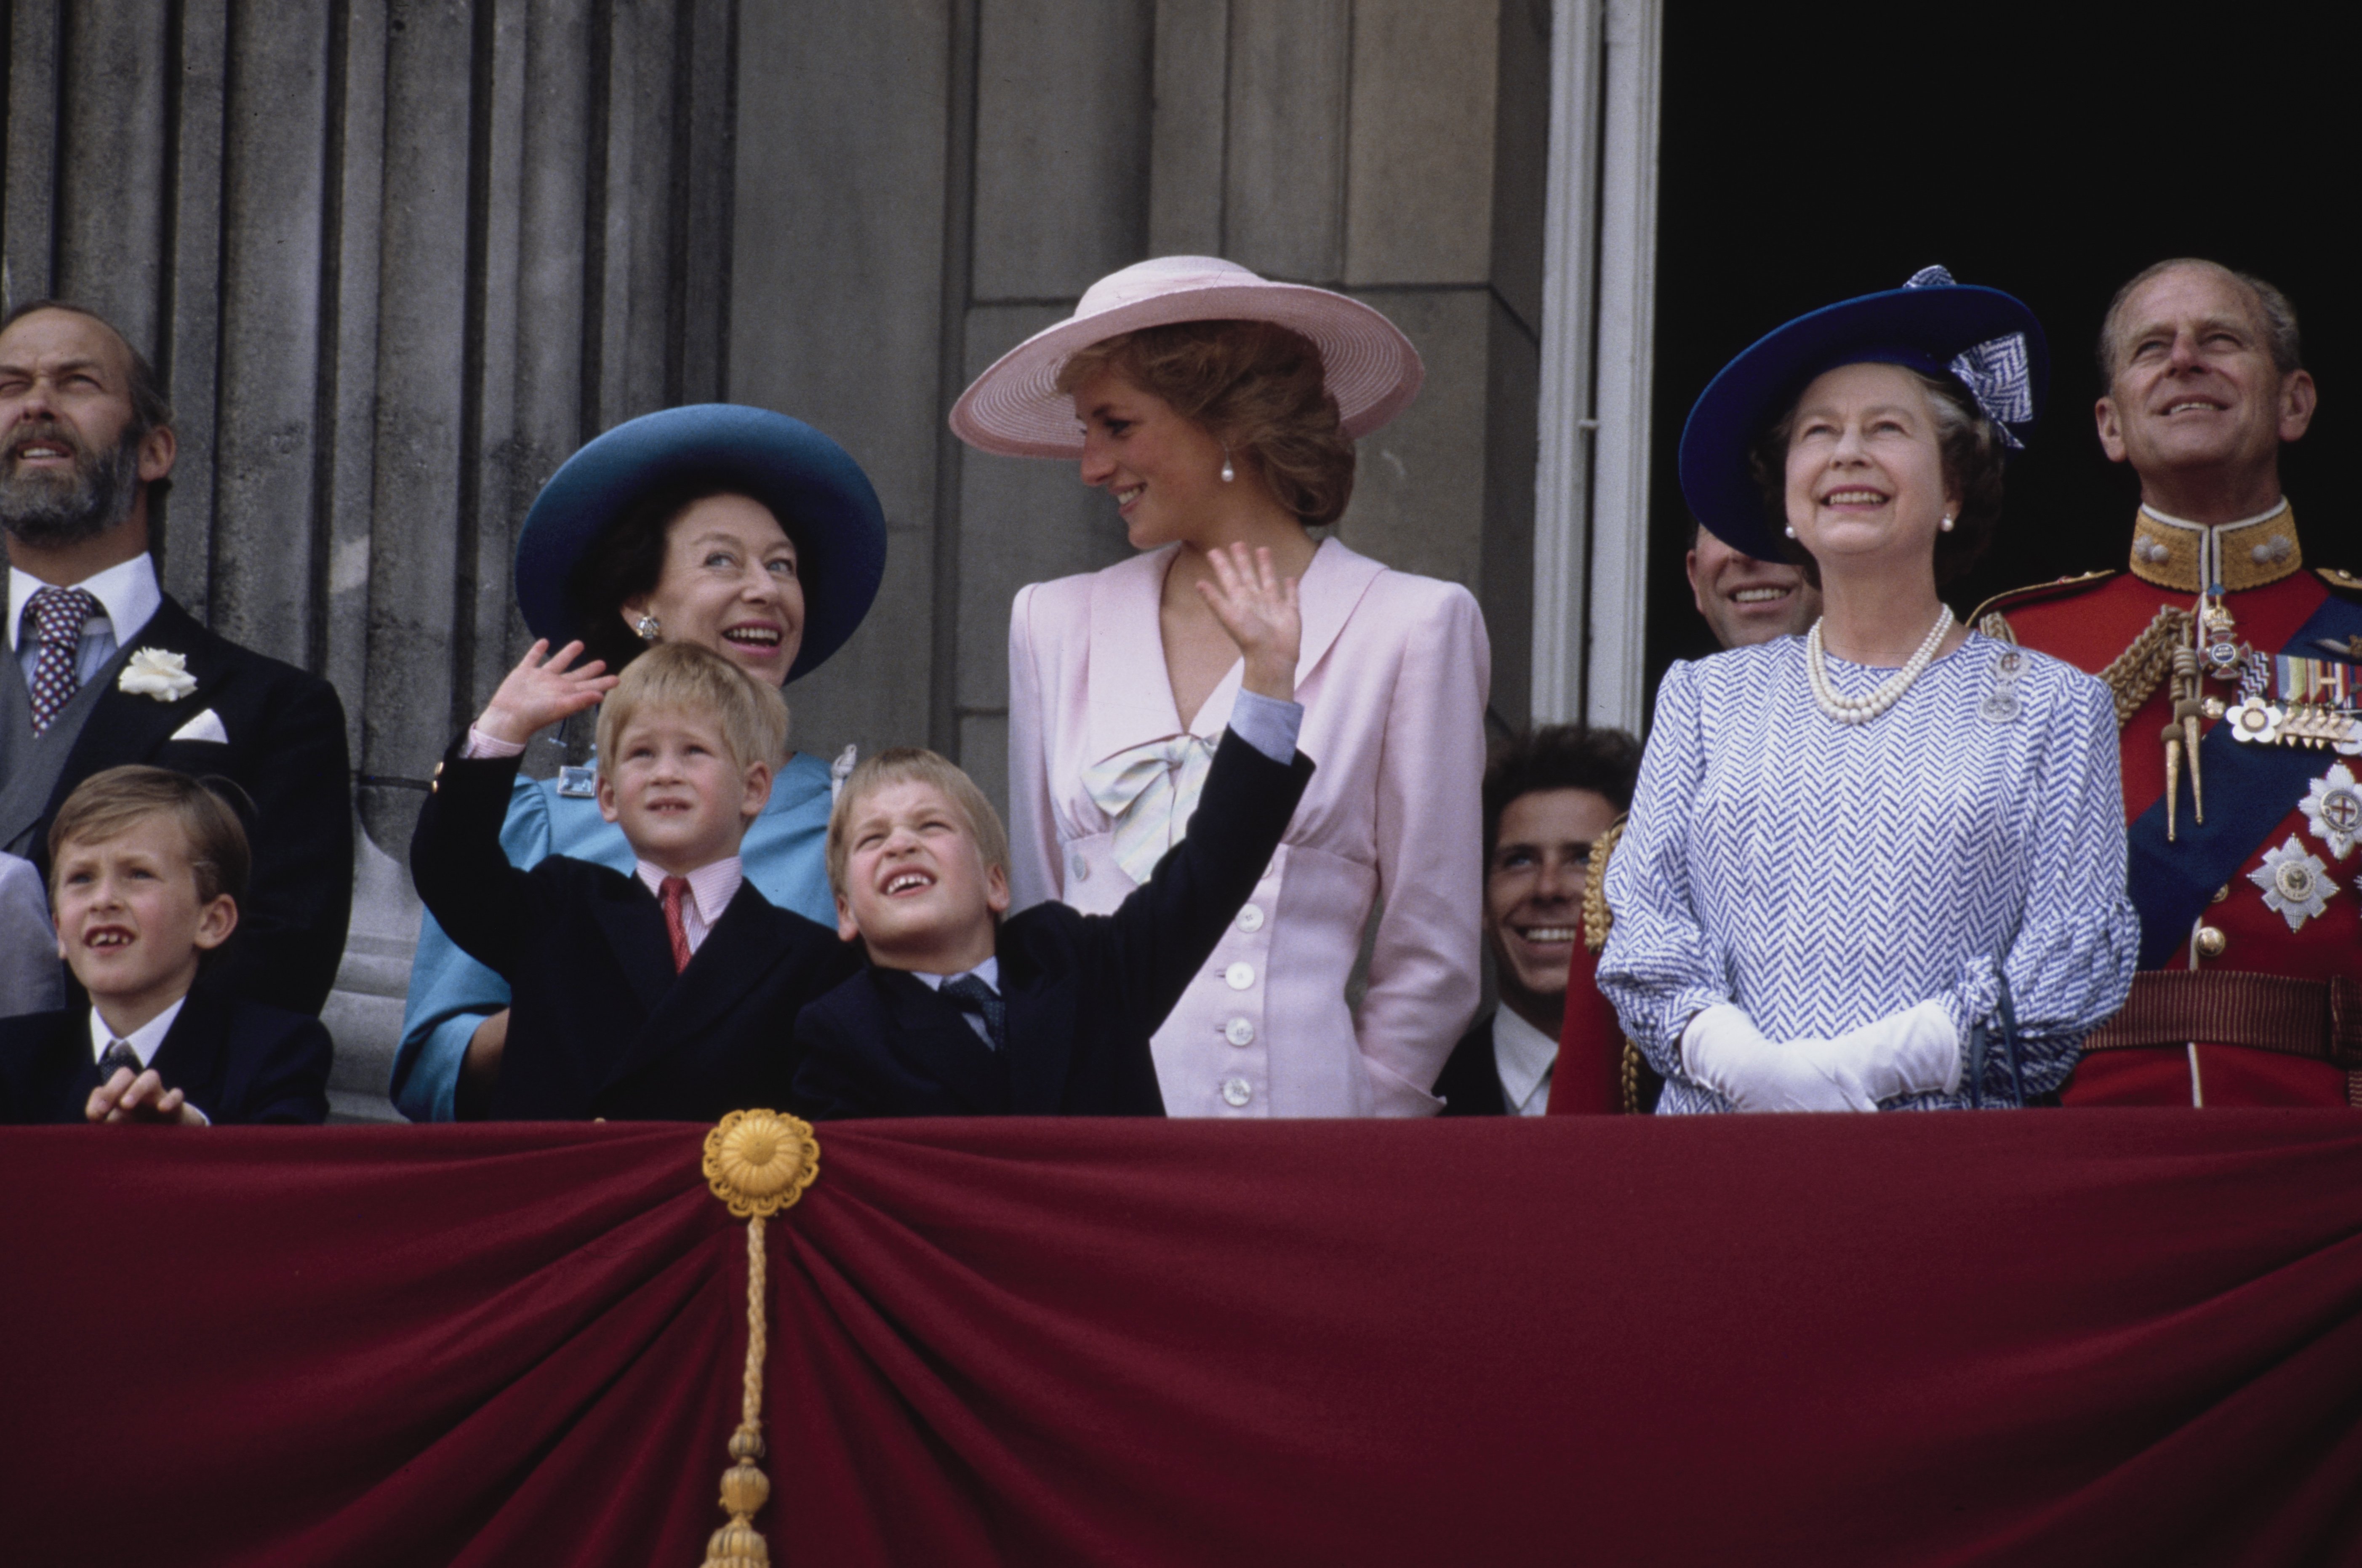 The royal family pictured on the balcony of Buckingham Palace in London for the Trooping the Color ceremony in June 1989. / Source: Getty Images